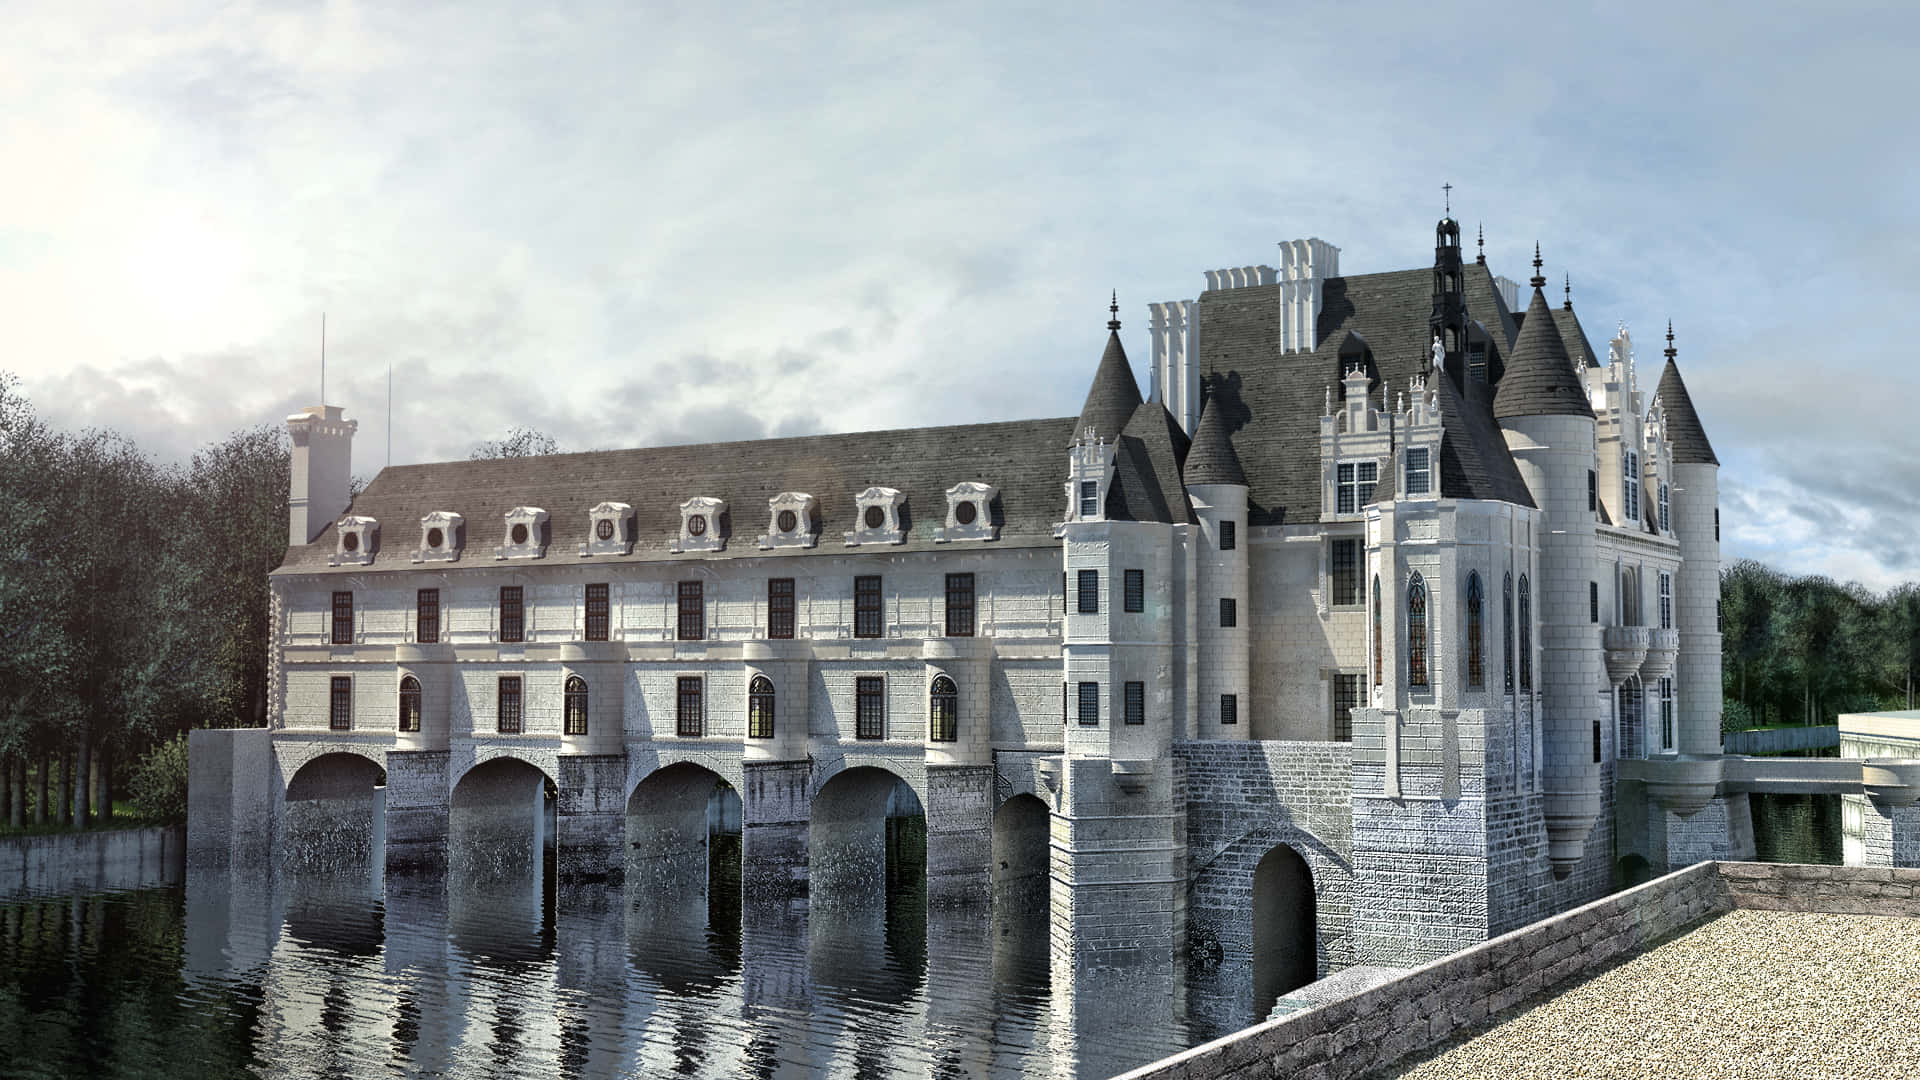 Caption: An Awe-Inspiring View of the Chenonceau Castle on a Gray Day Wallpaper